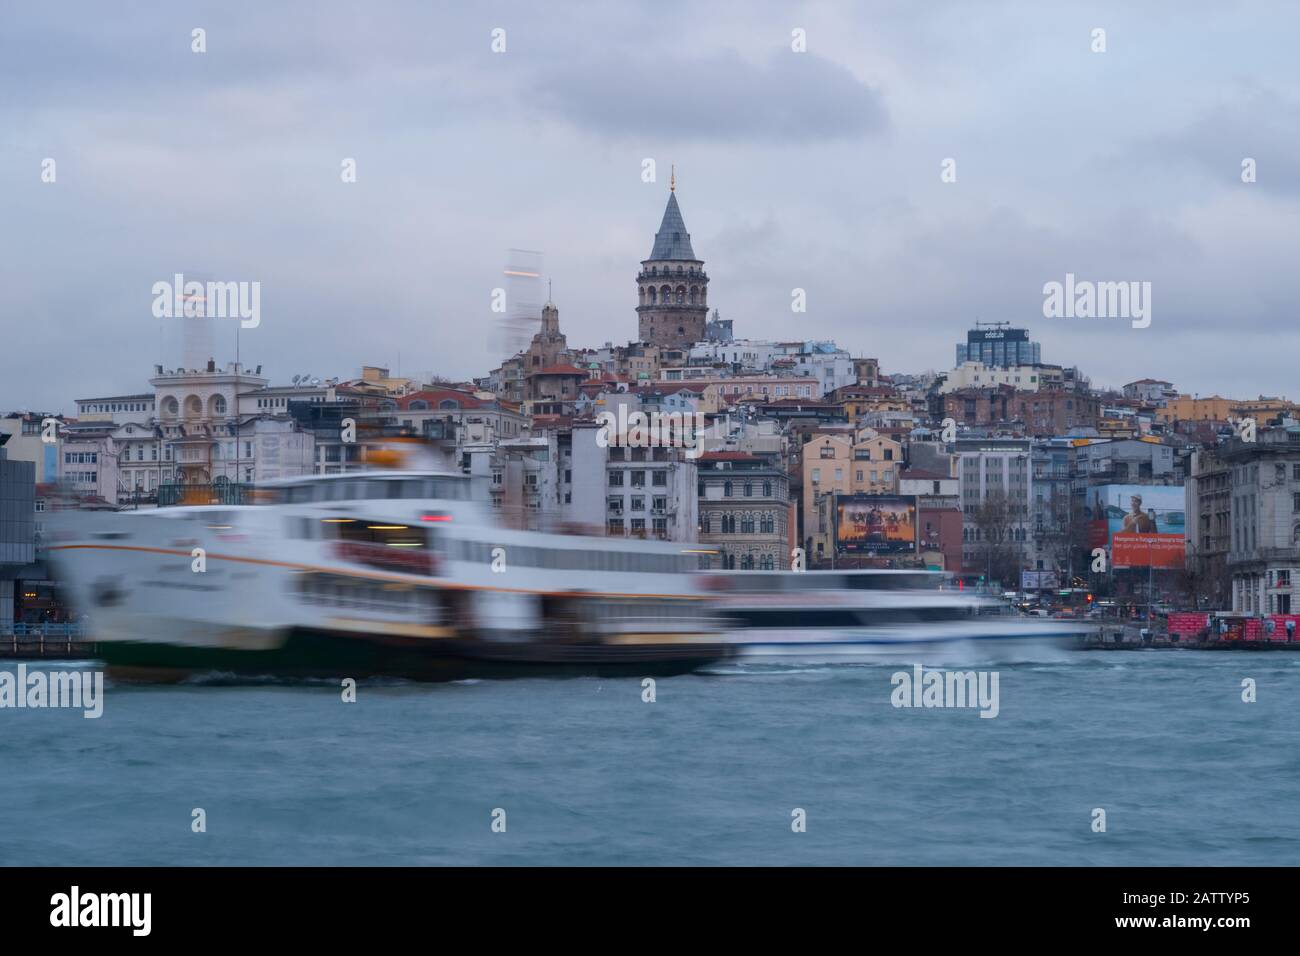 Istanbul, Turkey - Jan 13, 2020: Ferry Boat in Golden Horn with Galata Tower in Background, Istanbul, Turkey Stock Photo